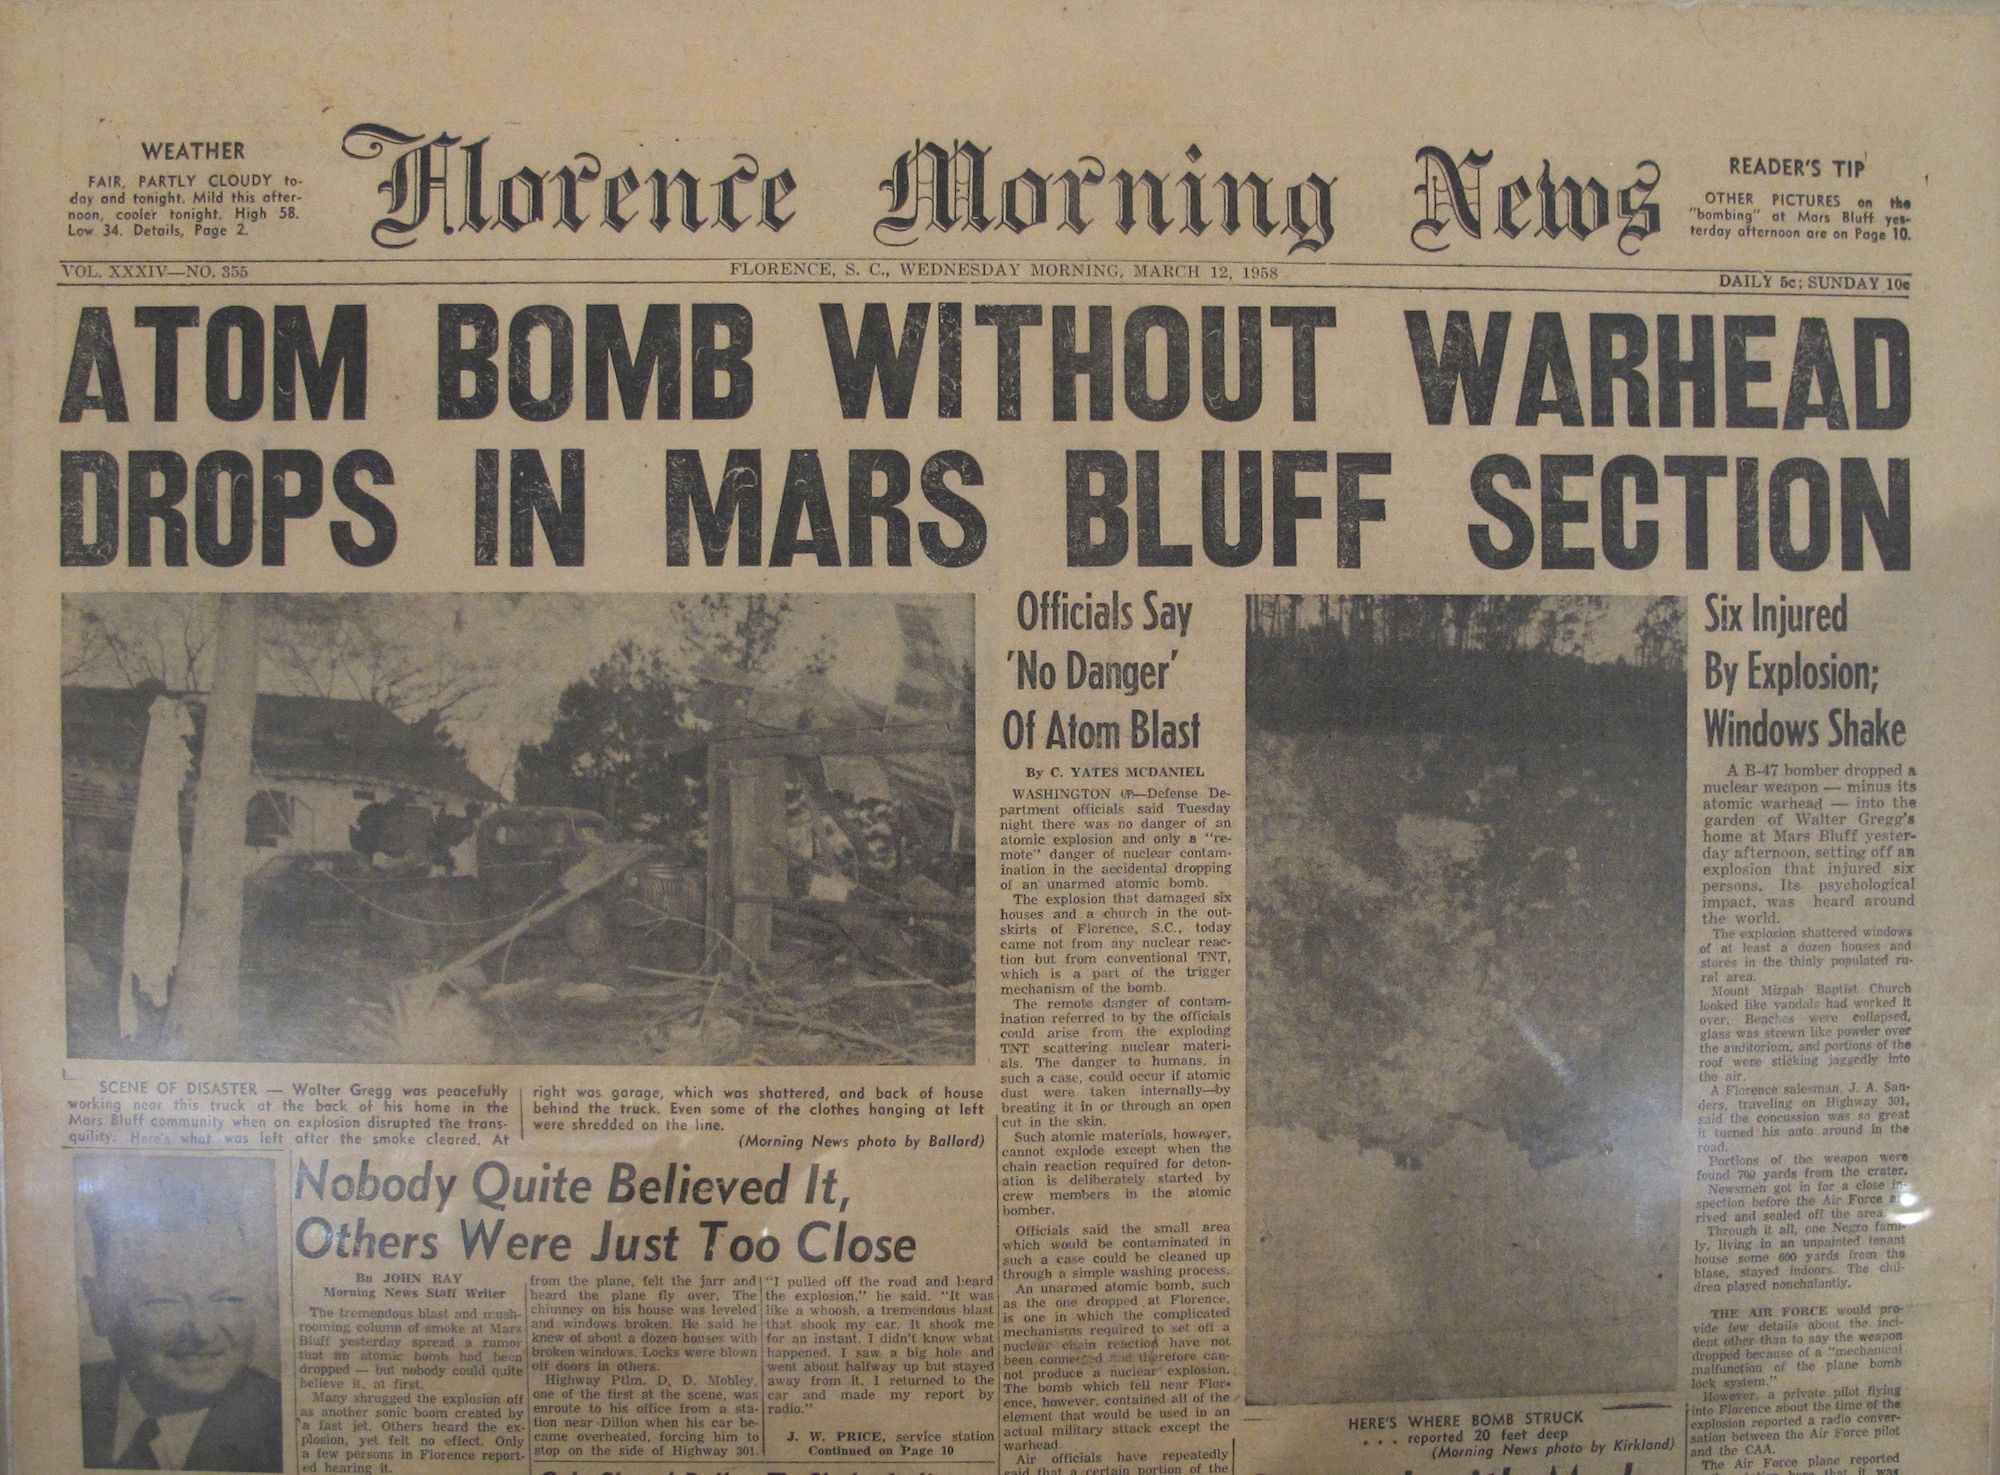 ATOM Bomb without warhead drops in mars bluff section.